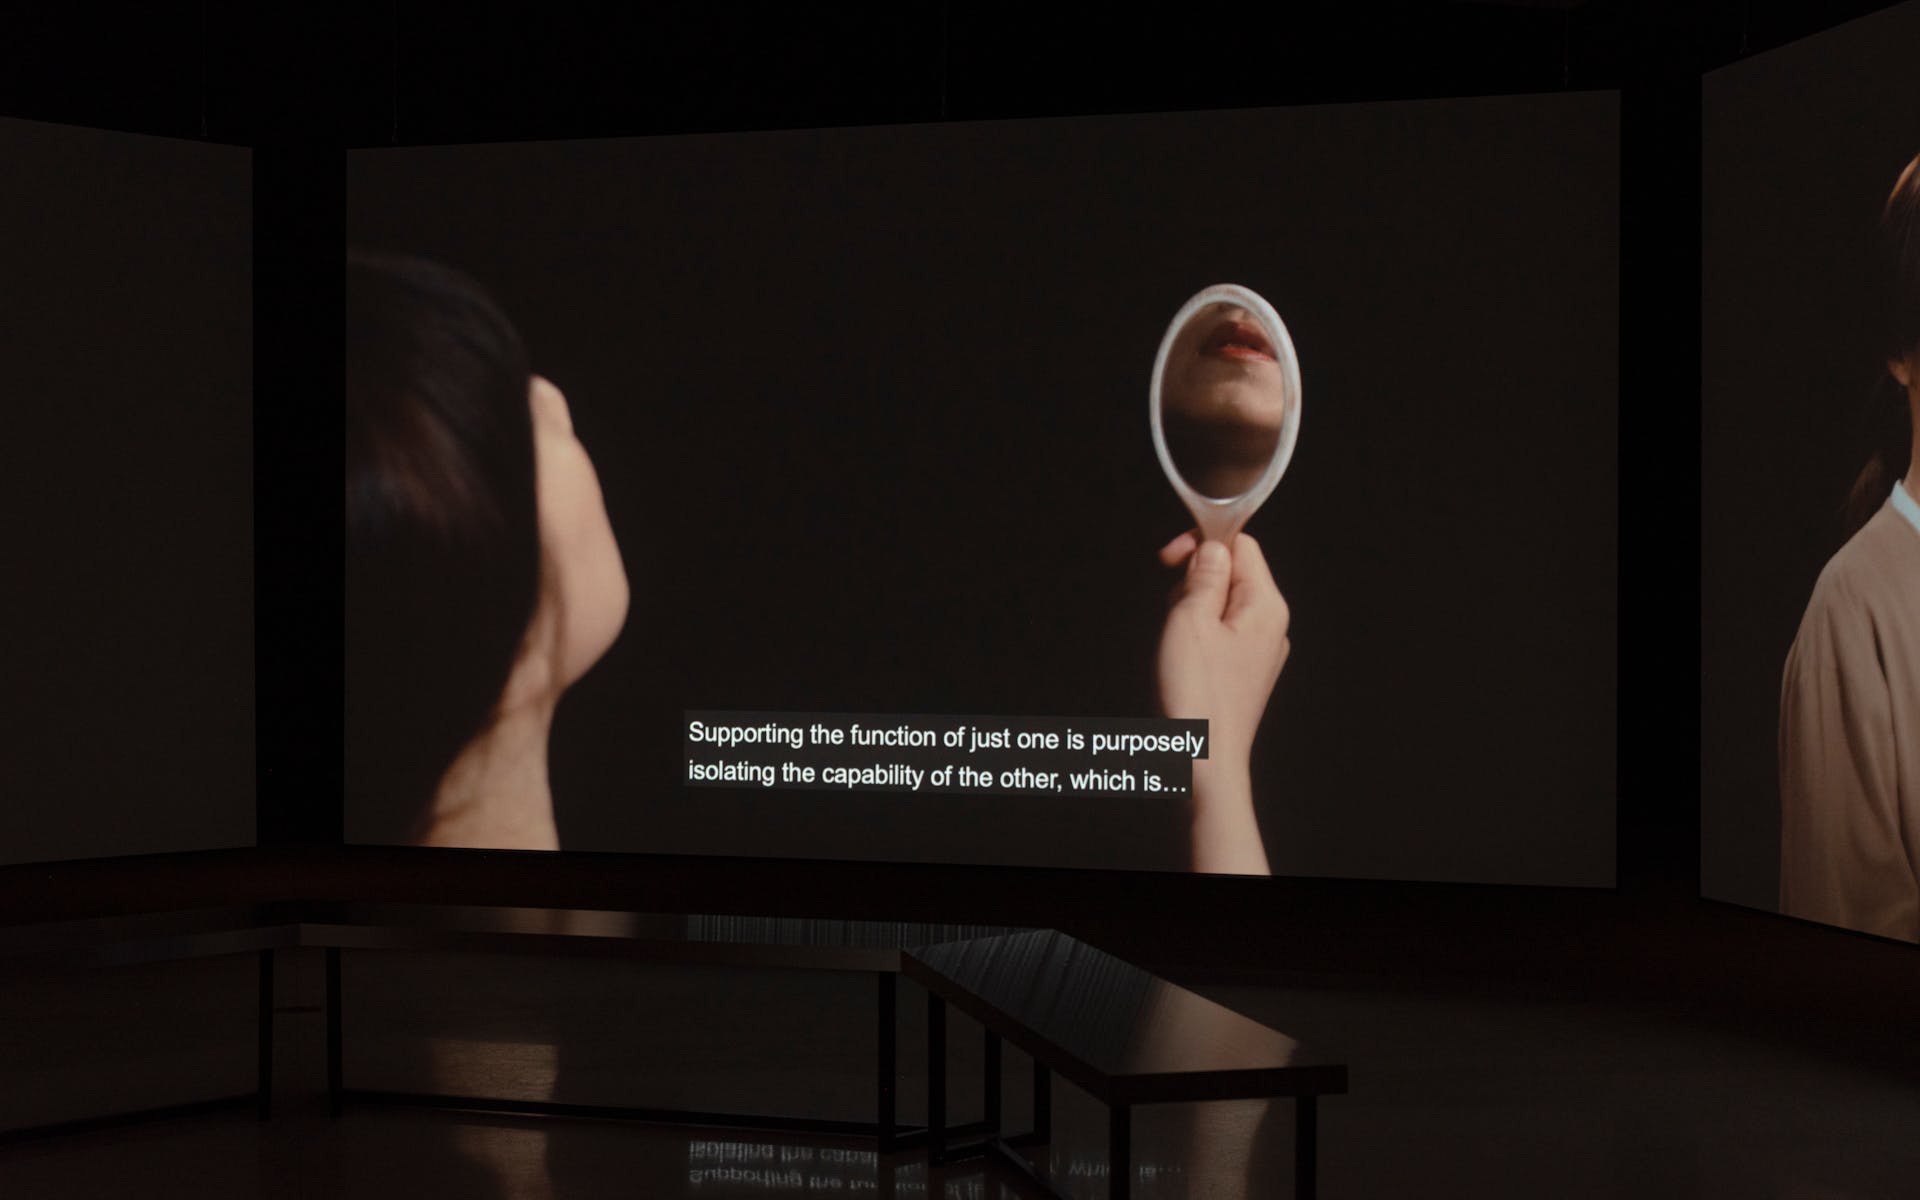 Large projection screen in dark gallery featuring image of woman holding mirror